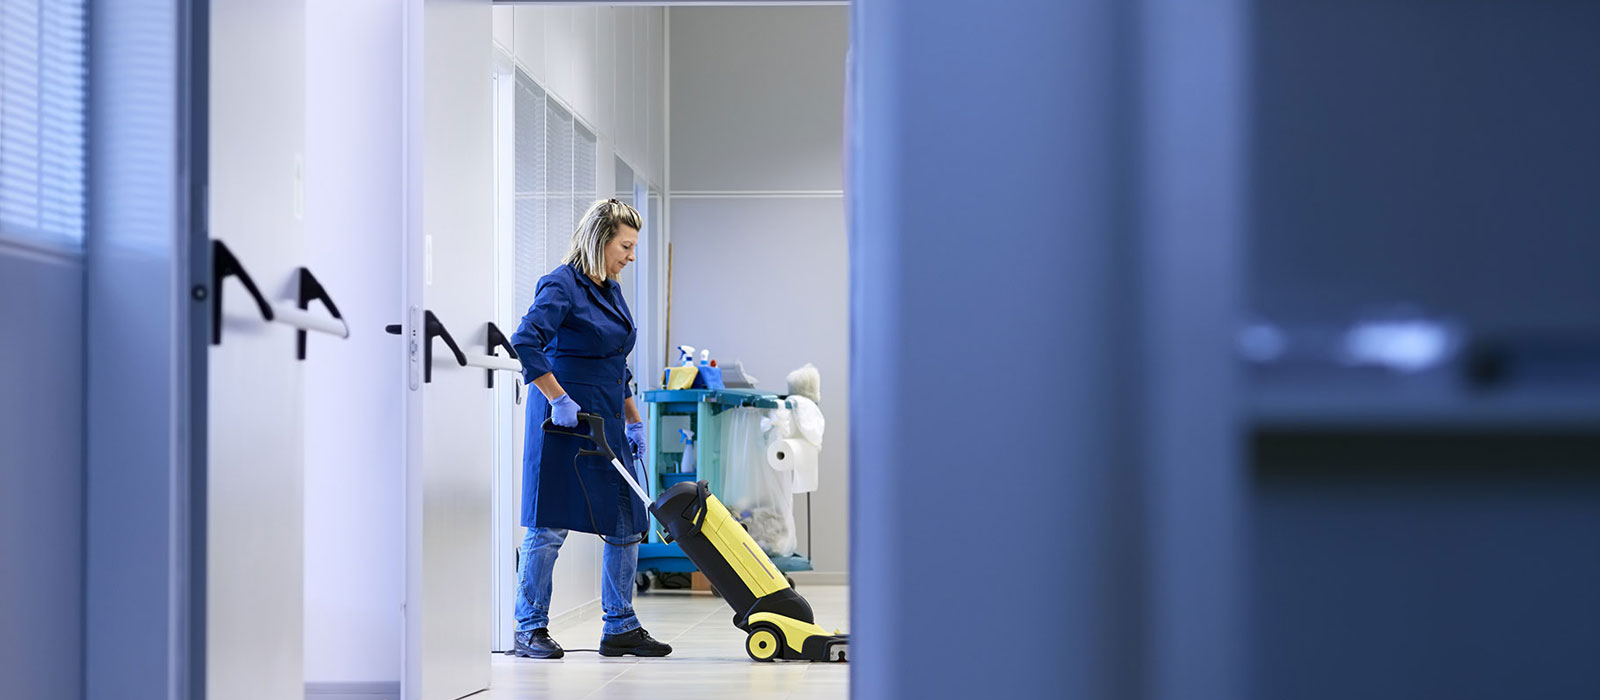 Pharmaceutical Cleaning Services